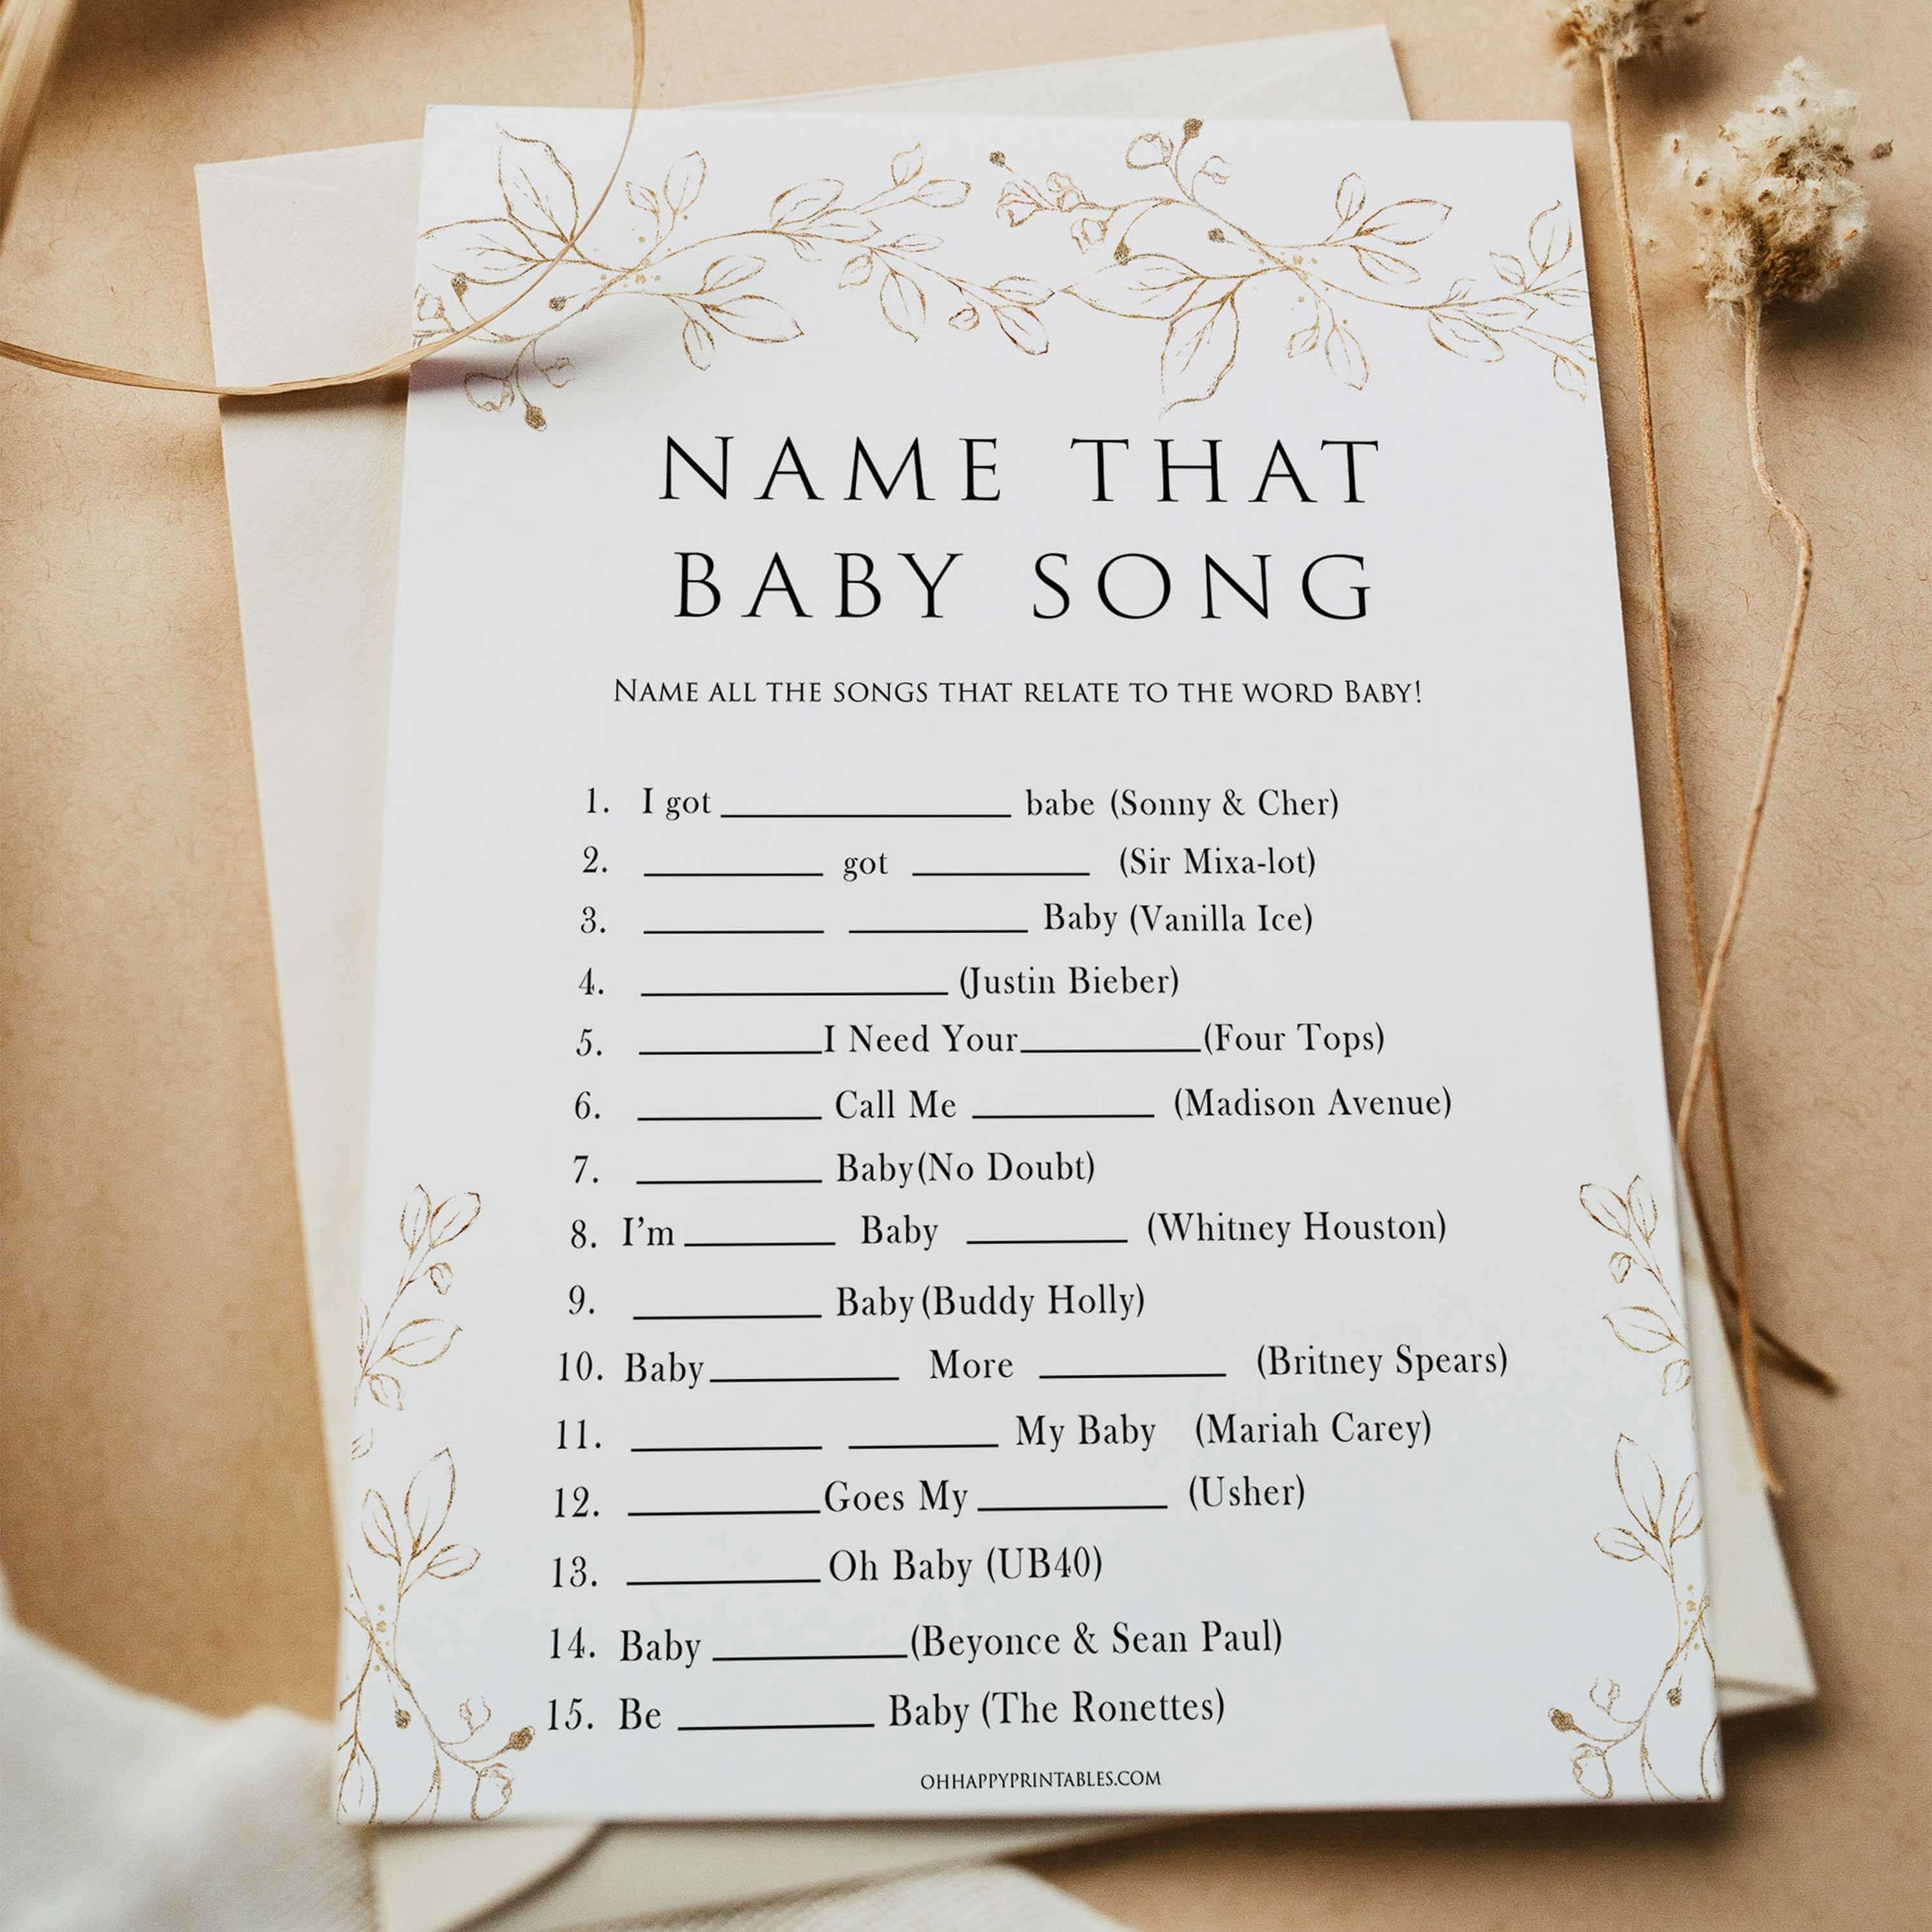 name that baby song game, Printable baby shower games, gold leaf baby games, baby shower games, fun baby shower ideas, top baby shower ideas, gold leaf baby shower, baby shower games, fun gold leaf baby shower ideas